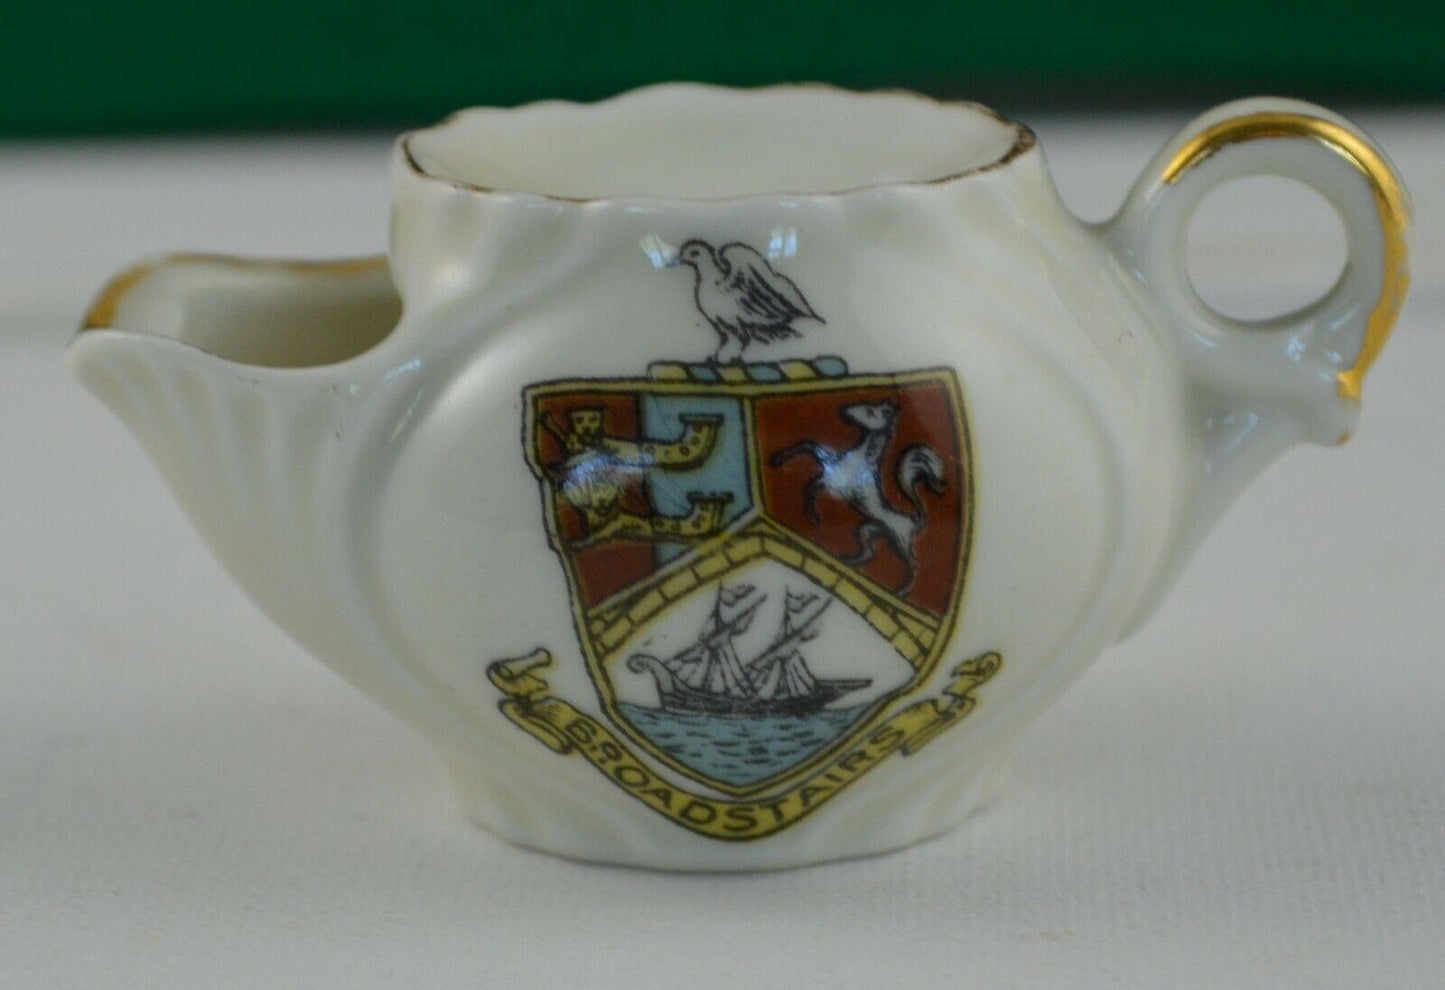 BROADSTAIRS CRESTED WARE MINIATURE SHAVING MUG & ALEXANDRA CHINA CANOE(PREVIOUSLY OWNED) GOOD CONDITION - TMD167207